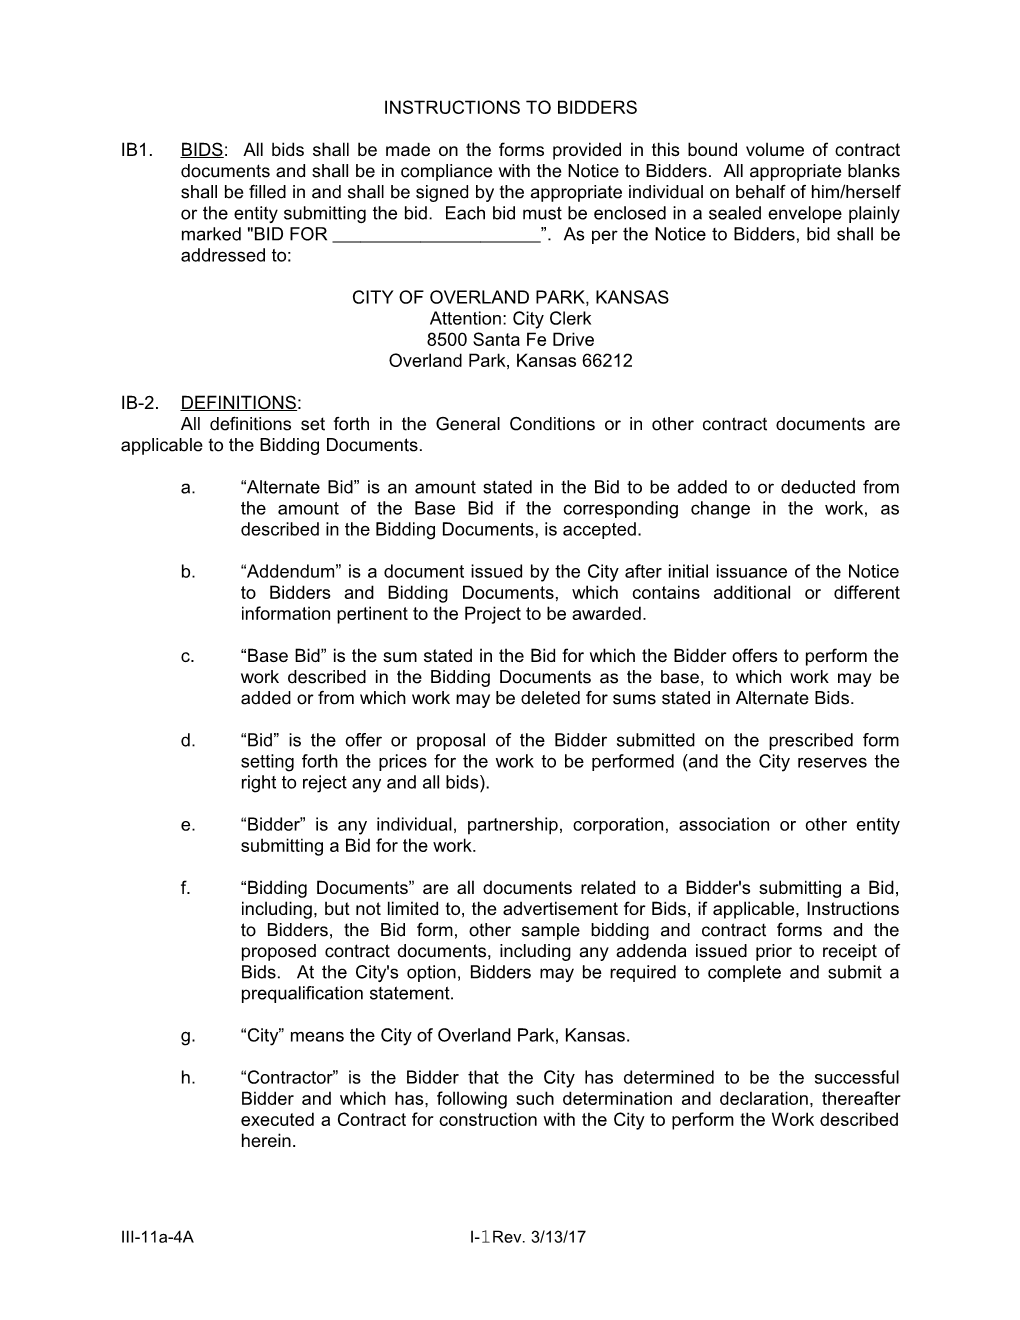 COP 211 - Instructions to Bidders (Option A)